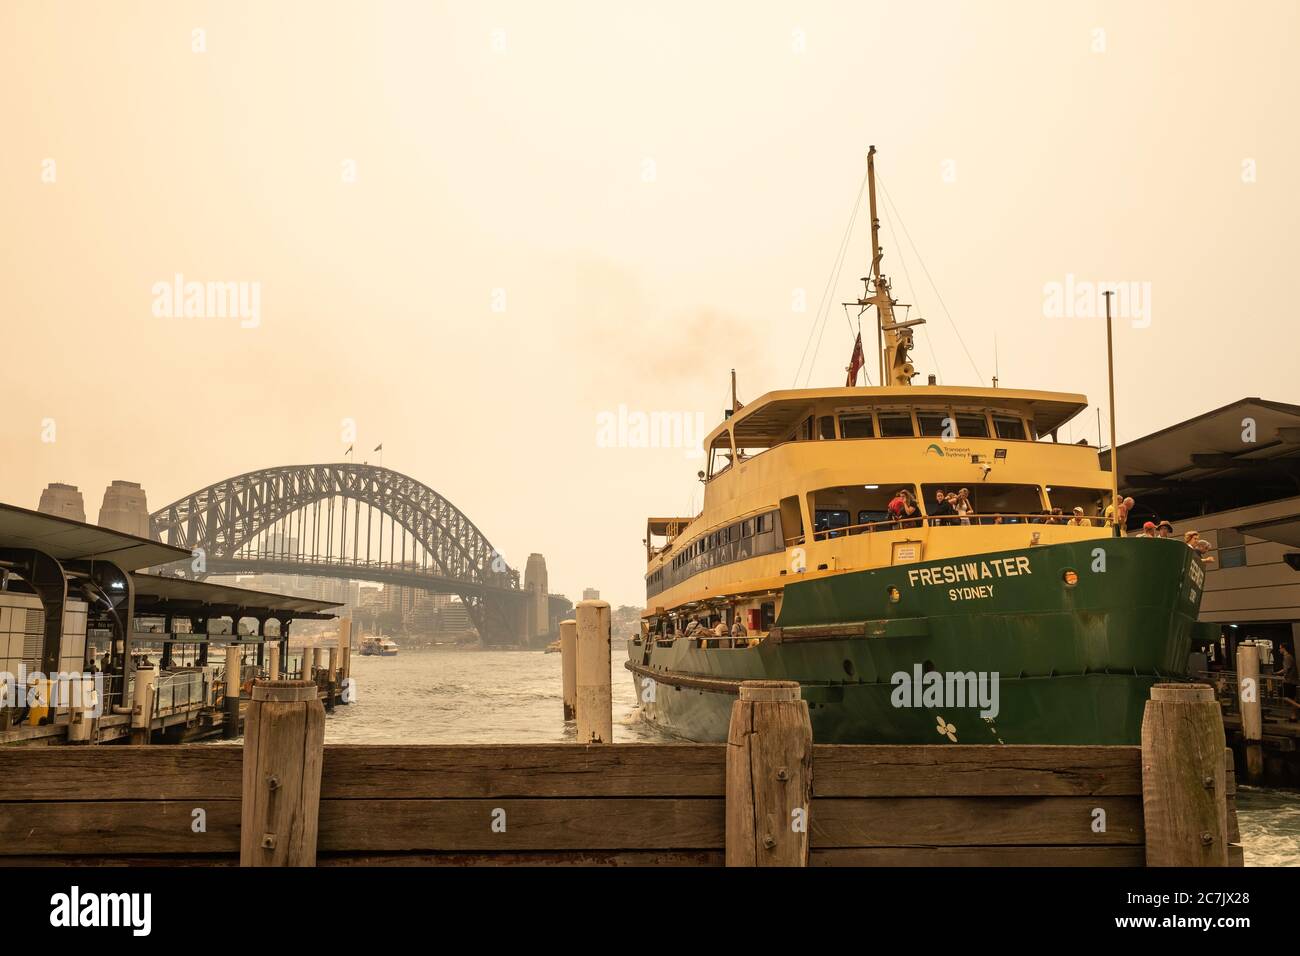 SYDNEY, AUSTRALIA - Dec 06, 2019: View from Circular Quay on the pollution affecting Sydney city. One of the most severe bush fires in NSW history aff Stock Photo